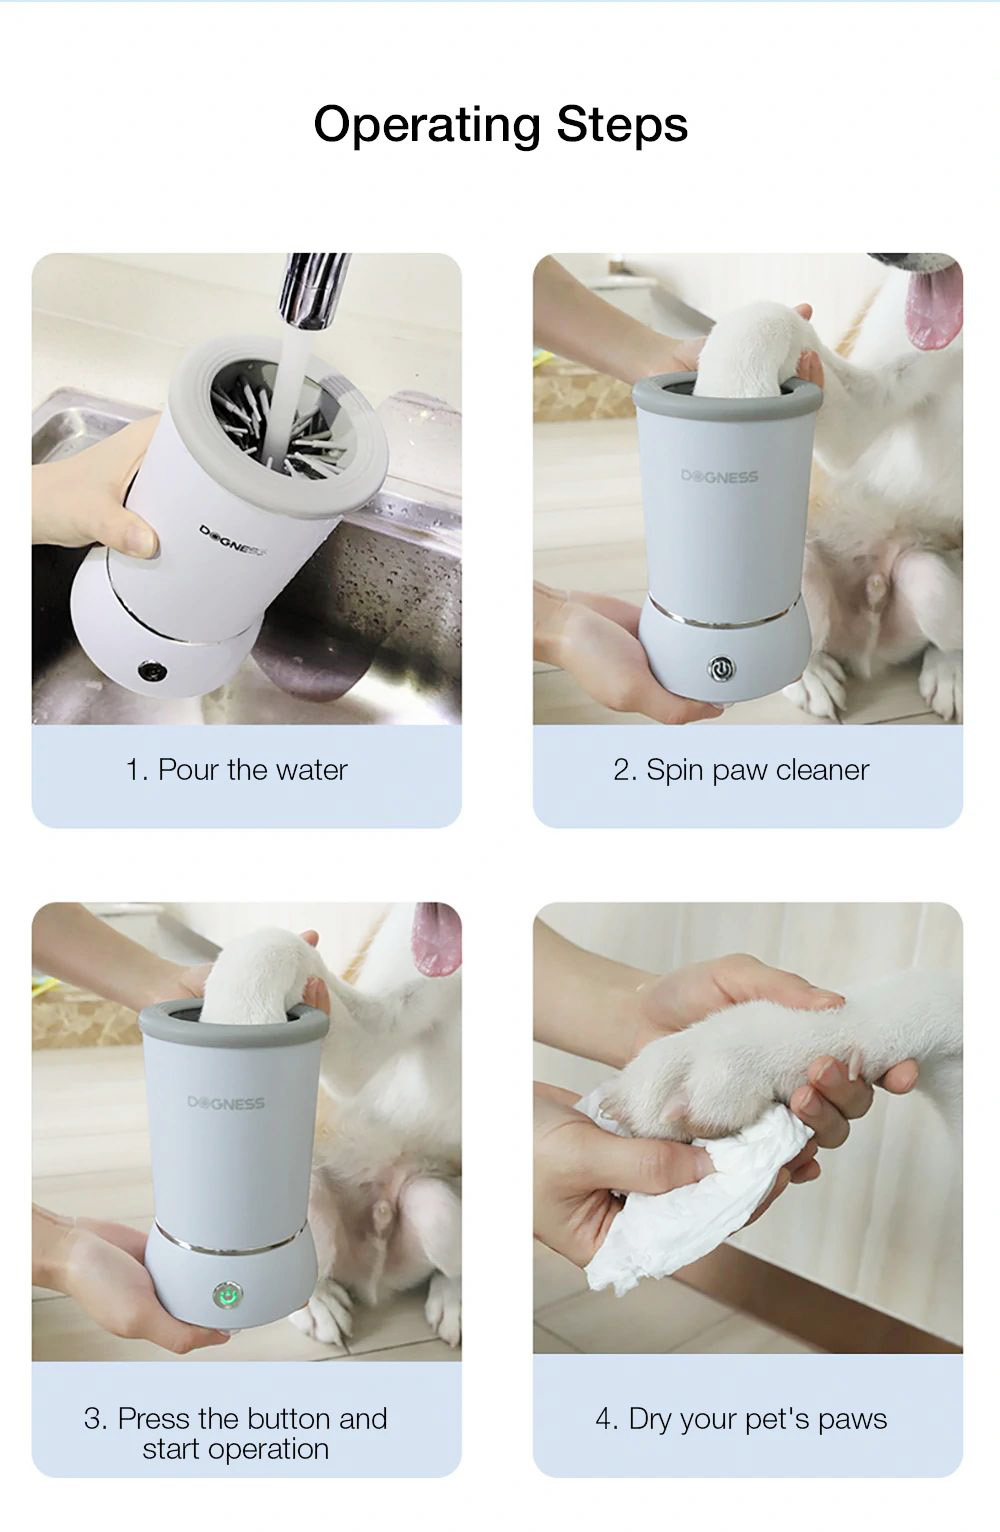 Dogness USB Charging Pet Paws Washer Cup with Soft Silicone Bristles Dog Foot Washing for Puppy Cat - White